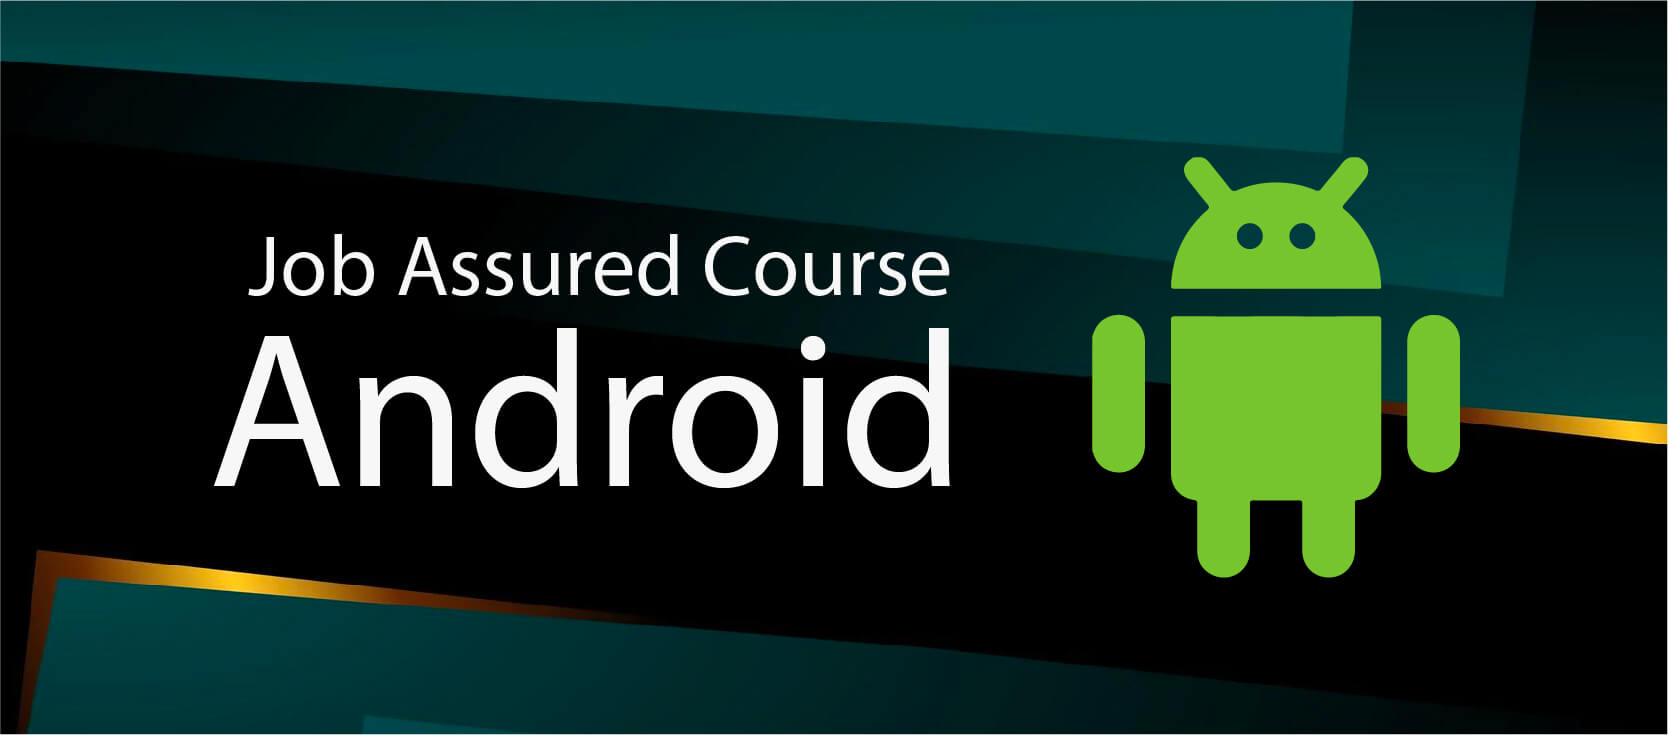 Android Job Assured Course